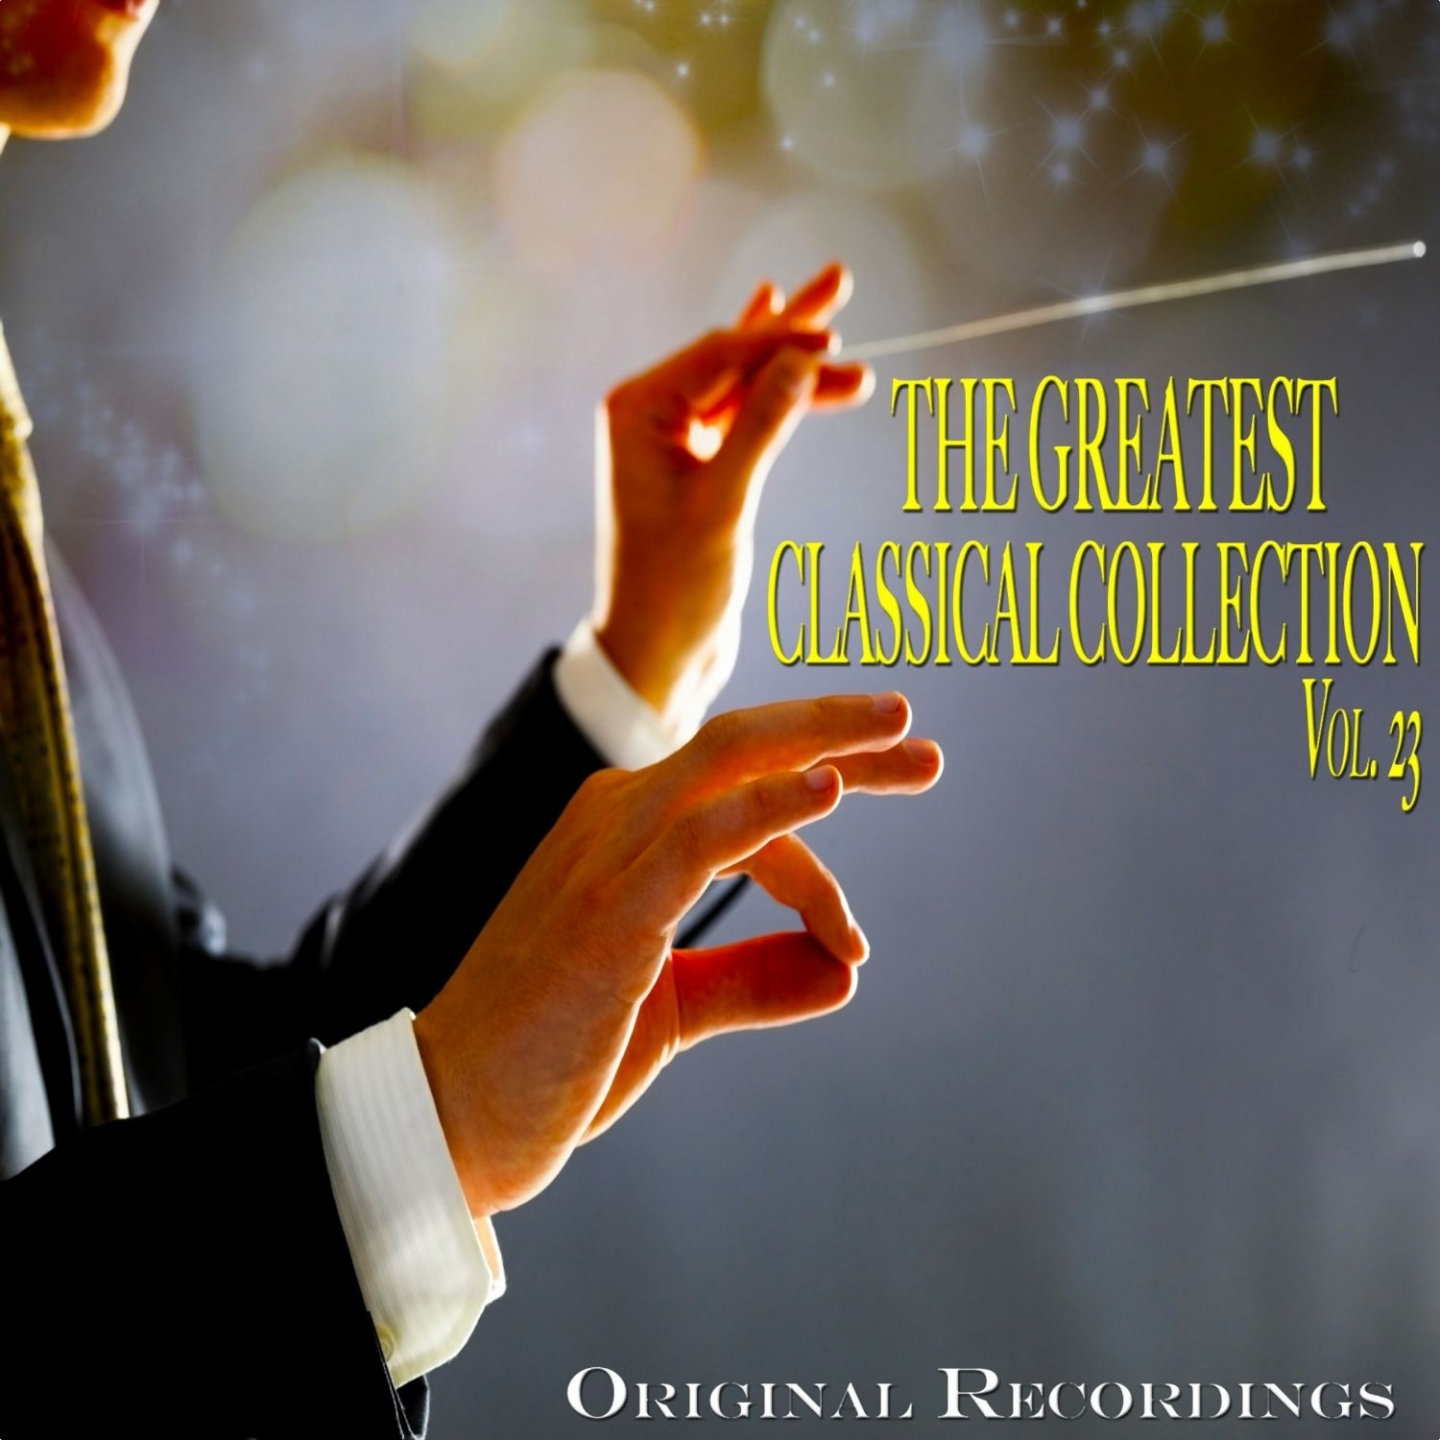 The Greatest Classical Collection Vol. 23